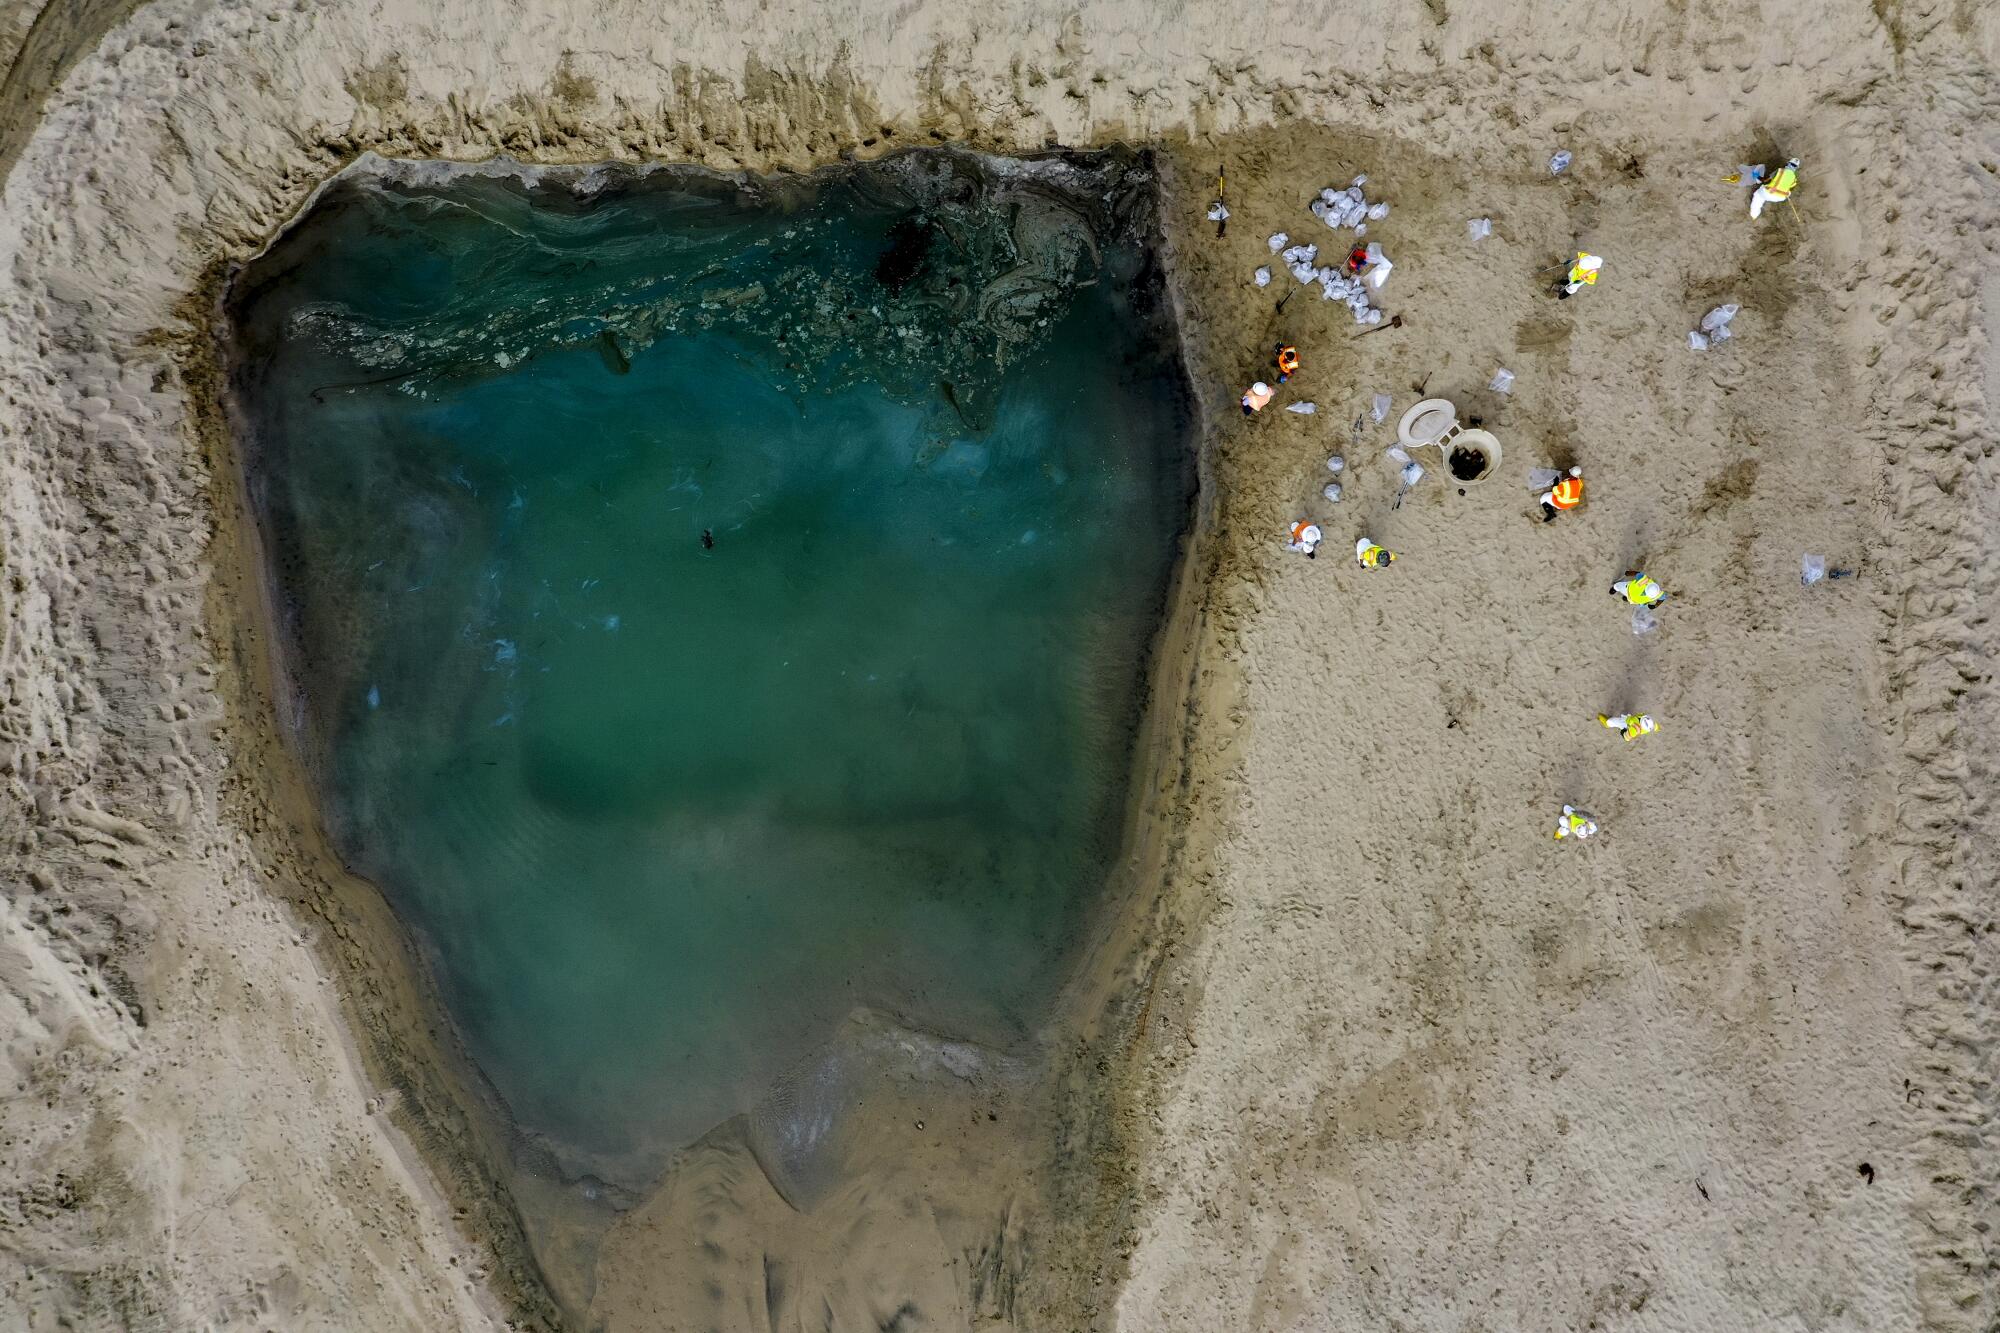  An aerial view of people gathered near the edge of a blue-green body of water surrounded by sand 